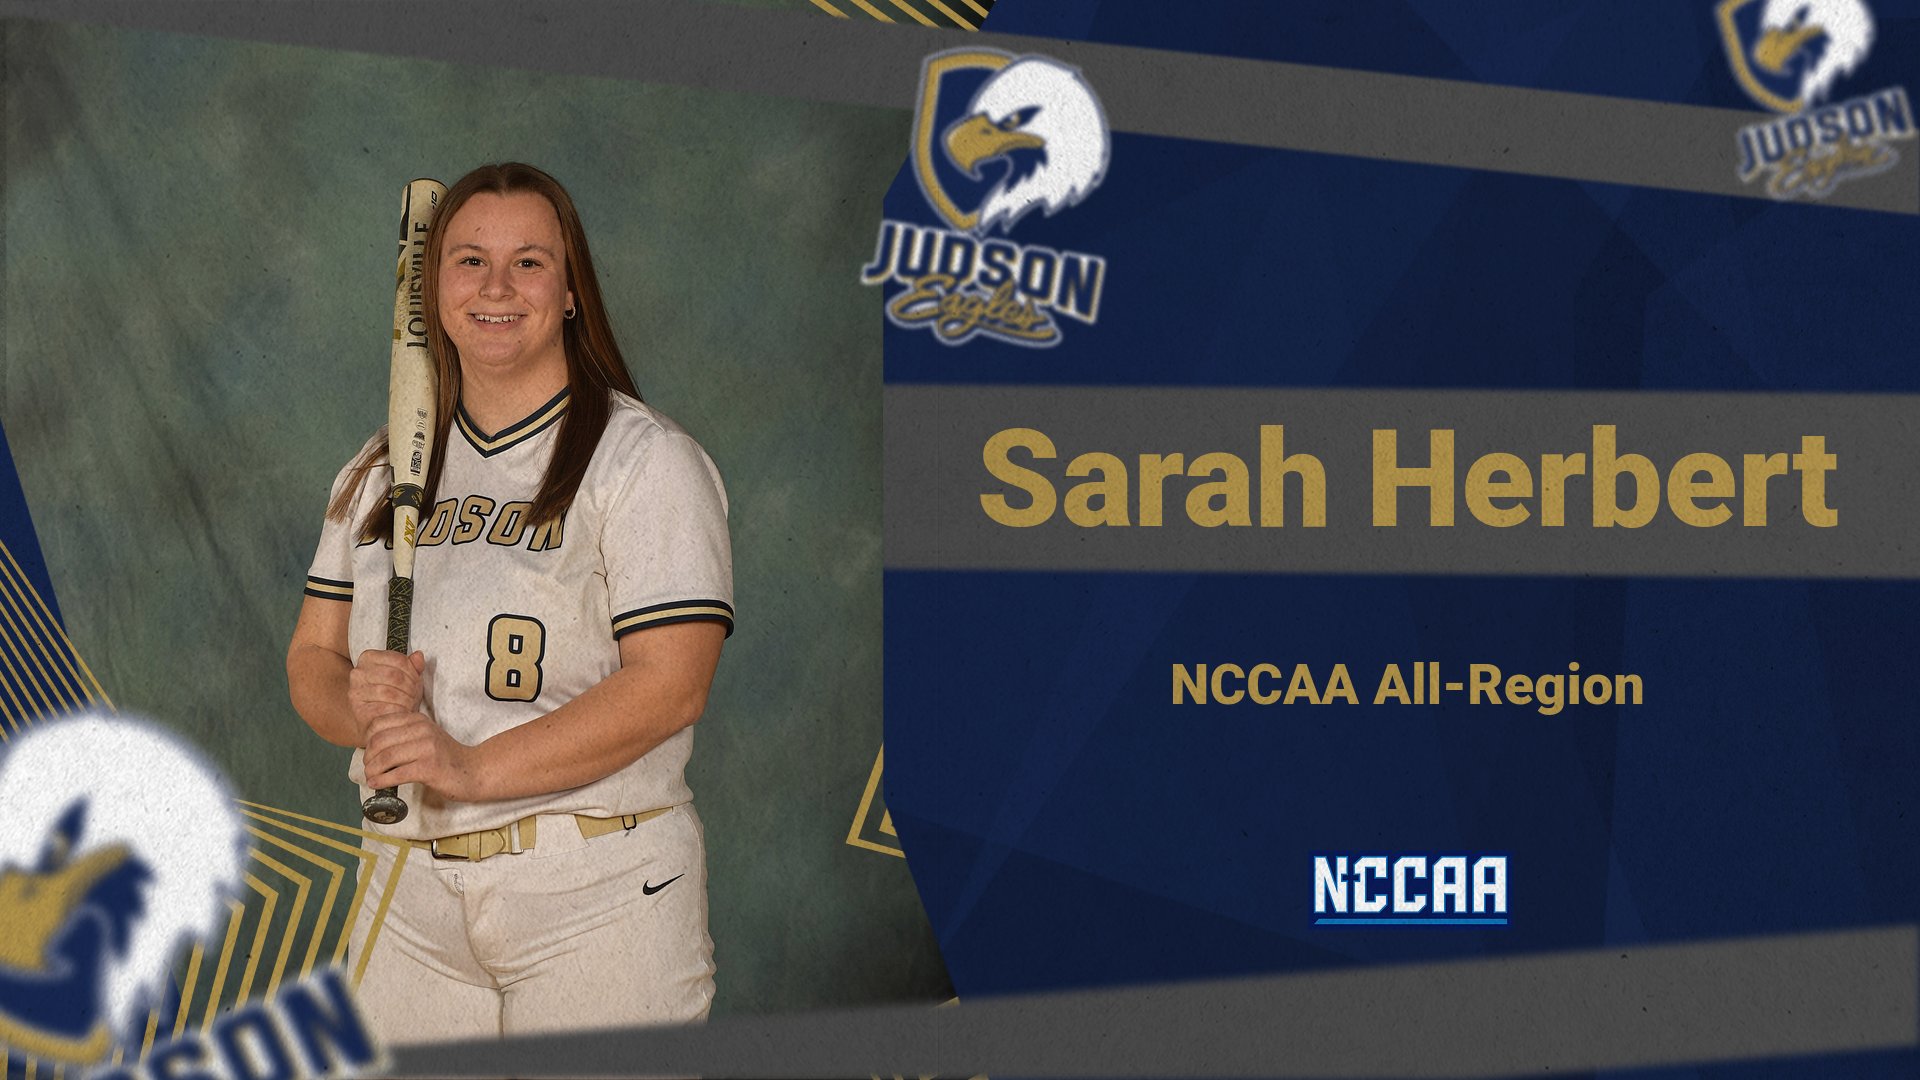 Herbert Receives Additional Recognition by Being Named to NCCAA North-Central Region Team